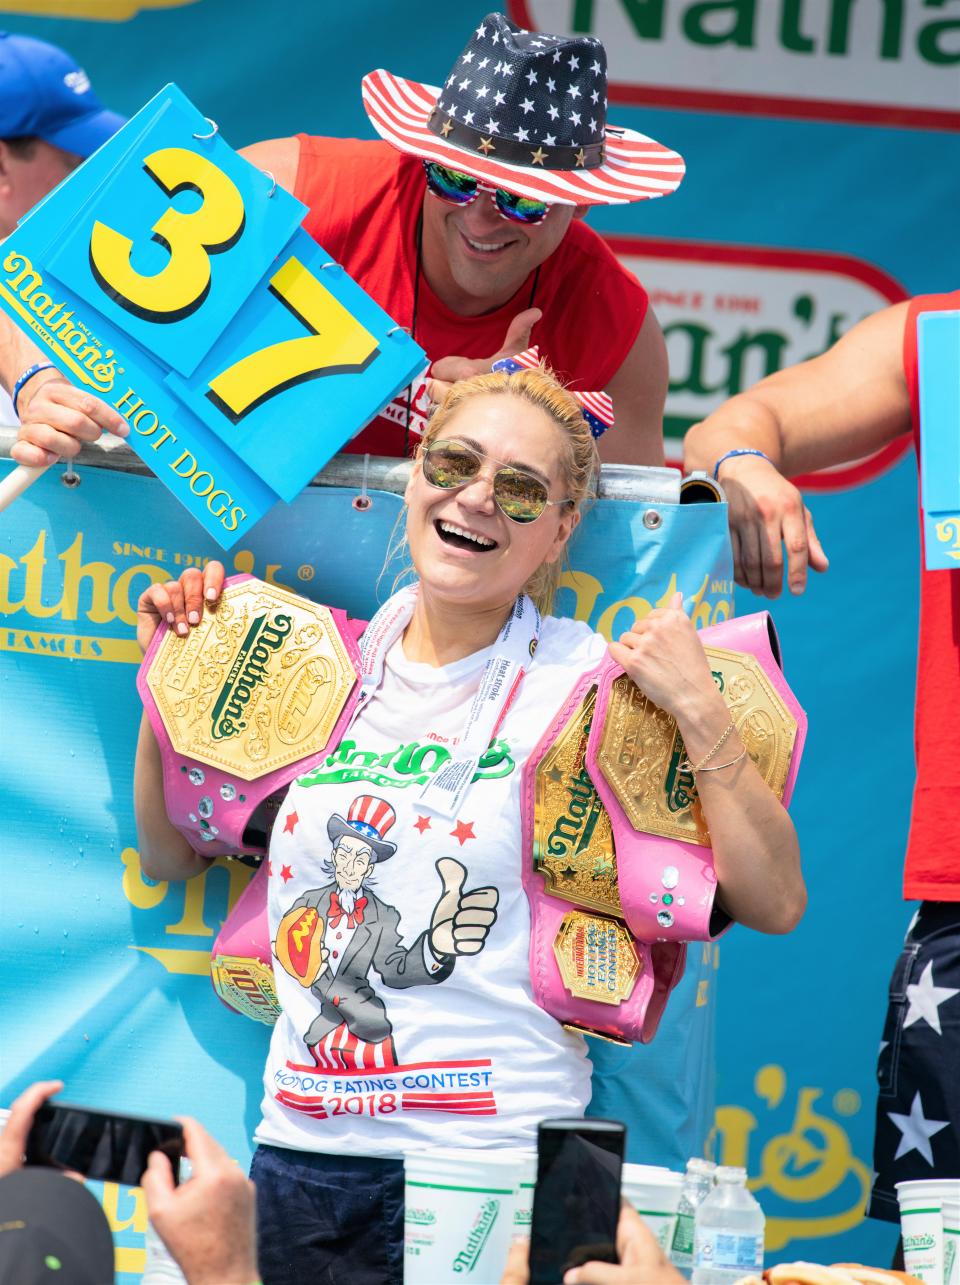 Miki Sudo is the top-ranked female competitor in Major League Eating, as seen here on Wednesday, July 4, 2018, in Coney Island, New York. Sudo will compete in Saturday's egg-roll eating contest in Lubbock.